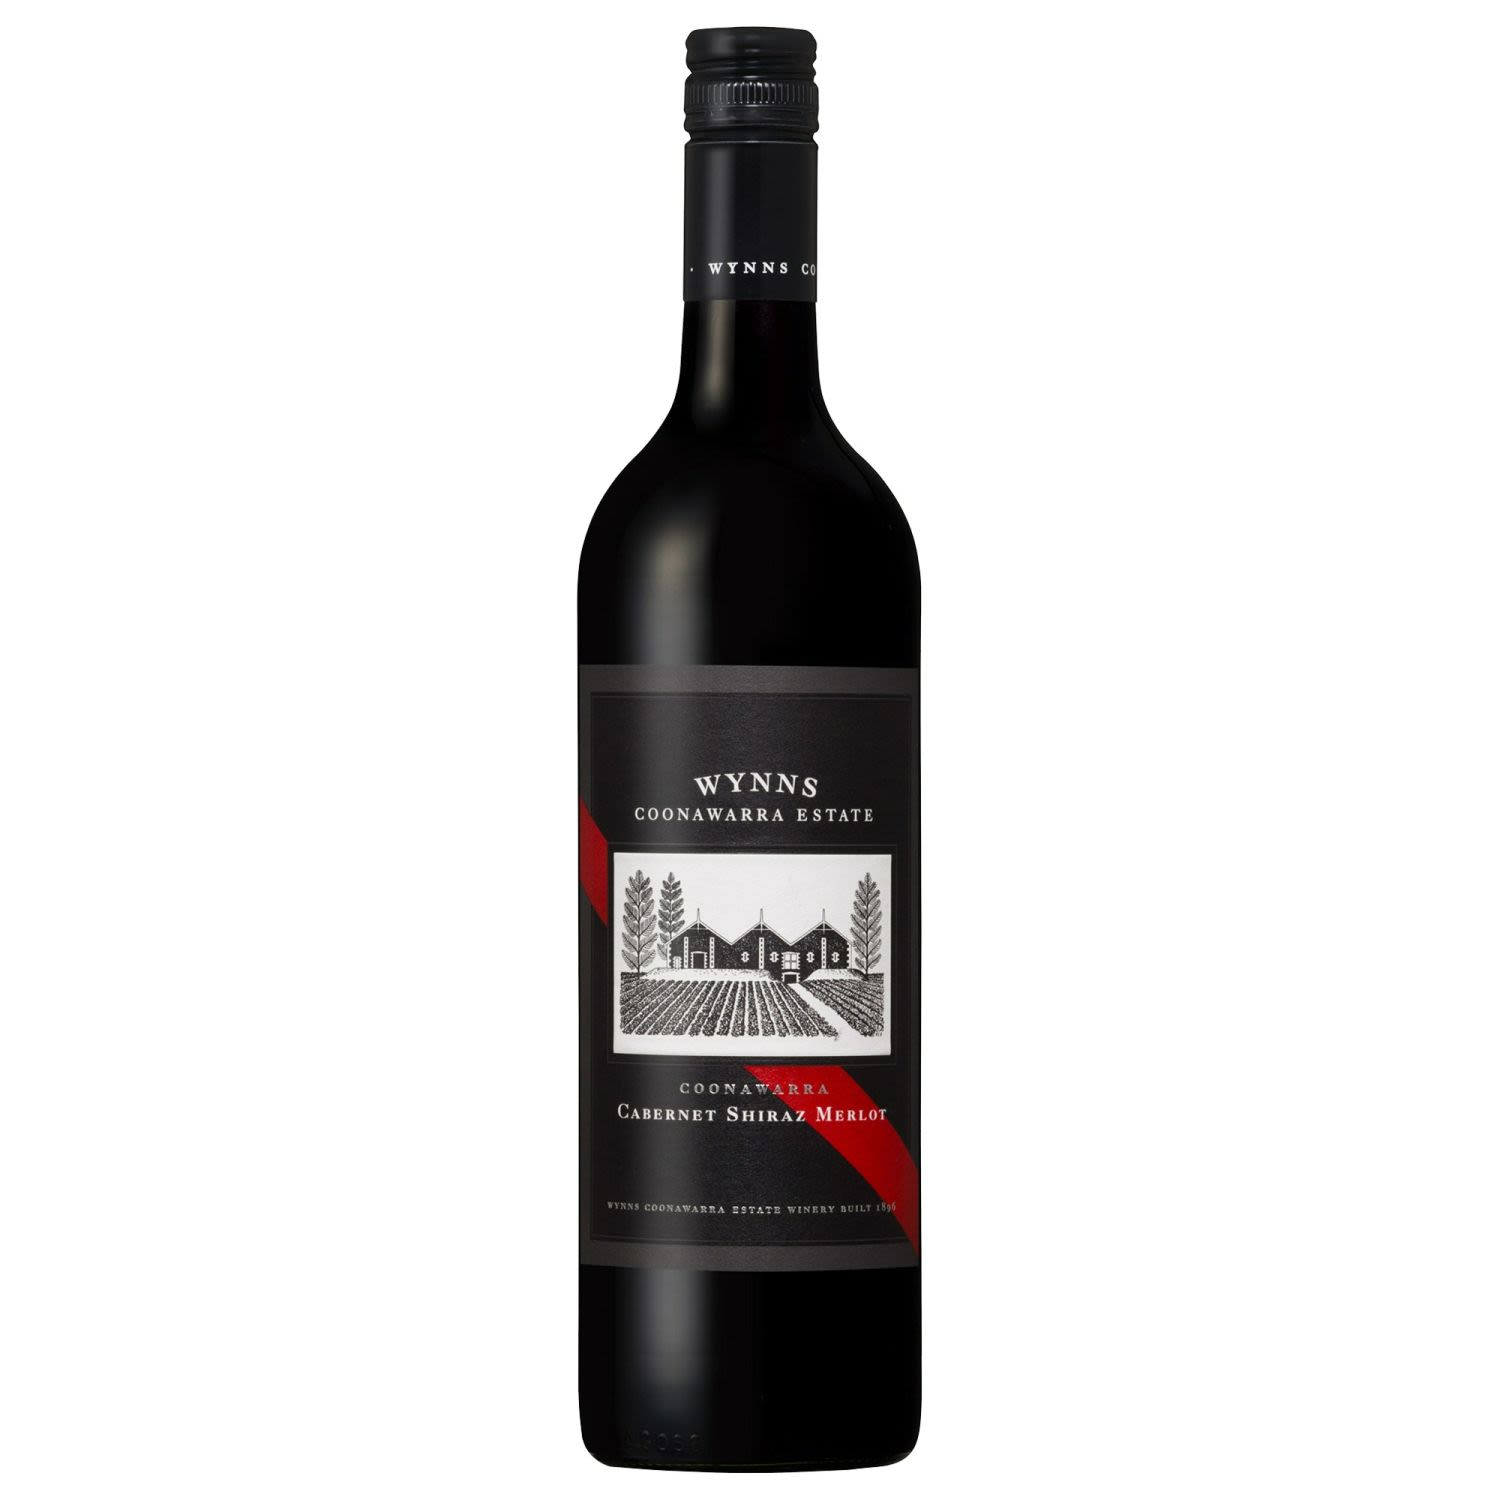 The first Wynns blend (then named Cabernet Hermitage) was produced in 1969, allowing Wynns a long history with this traditional Australian-style blend.  The “red-stripe” blend of three red varieties creates a versatile wine suited to many occasions. Soft fruit and judicious oak create a wine that is perfect for current drinking or medium-term cellaring. The Wynns Cabernet Shiraz Merlot is a well-balanced and approachable wine, providing a true reflection of its regionality.<br /> <br />Alcohol Volume: 13.60%<br /><br />Pack Format: Bottle<br /><br />Standard Drinks: 8<br /><br />Pack Type: Bottle<br /><br />Country of Origin: Australia<br /><br />Region: Coonawarra<br /><br />Vintage: Vintages Vary<br />